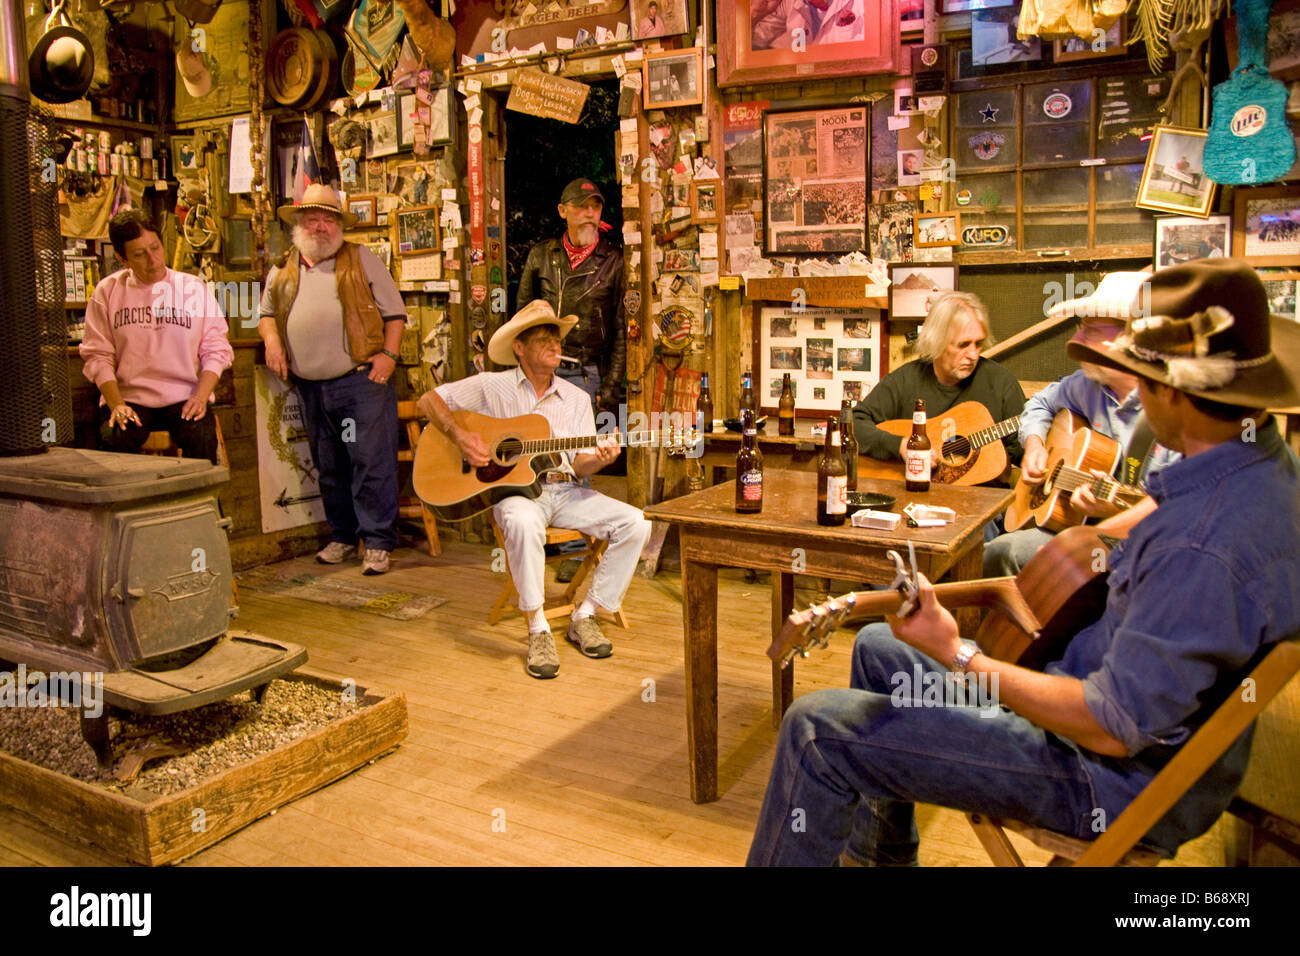 Texas Hill Country, Luckenbach General Store, backroom tavern, musician jam session Stock Photo